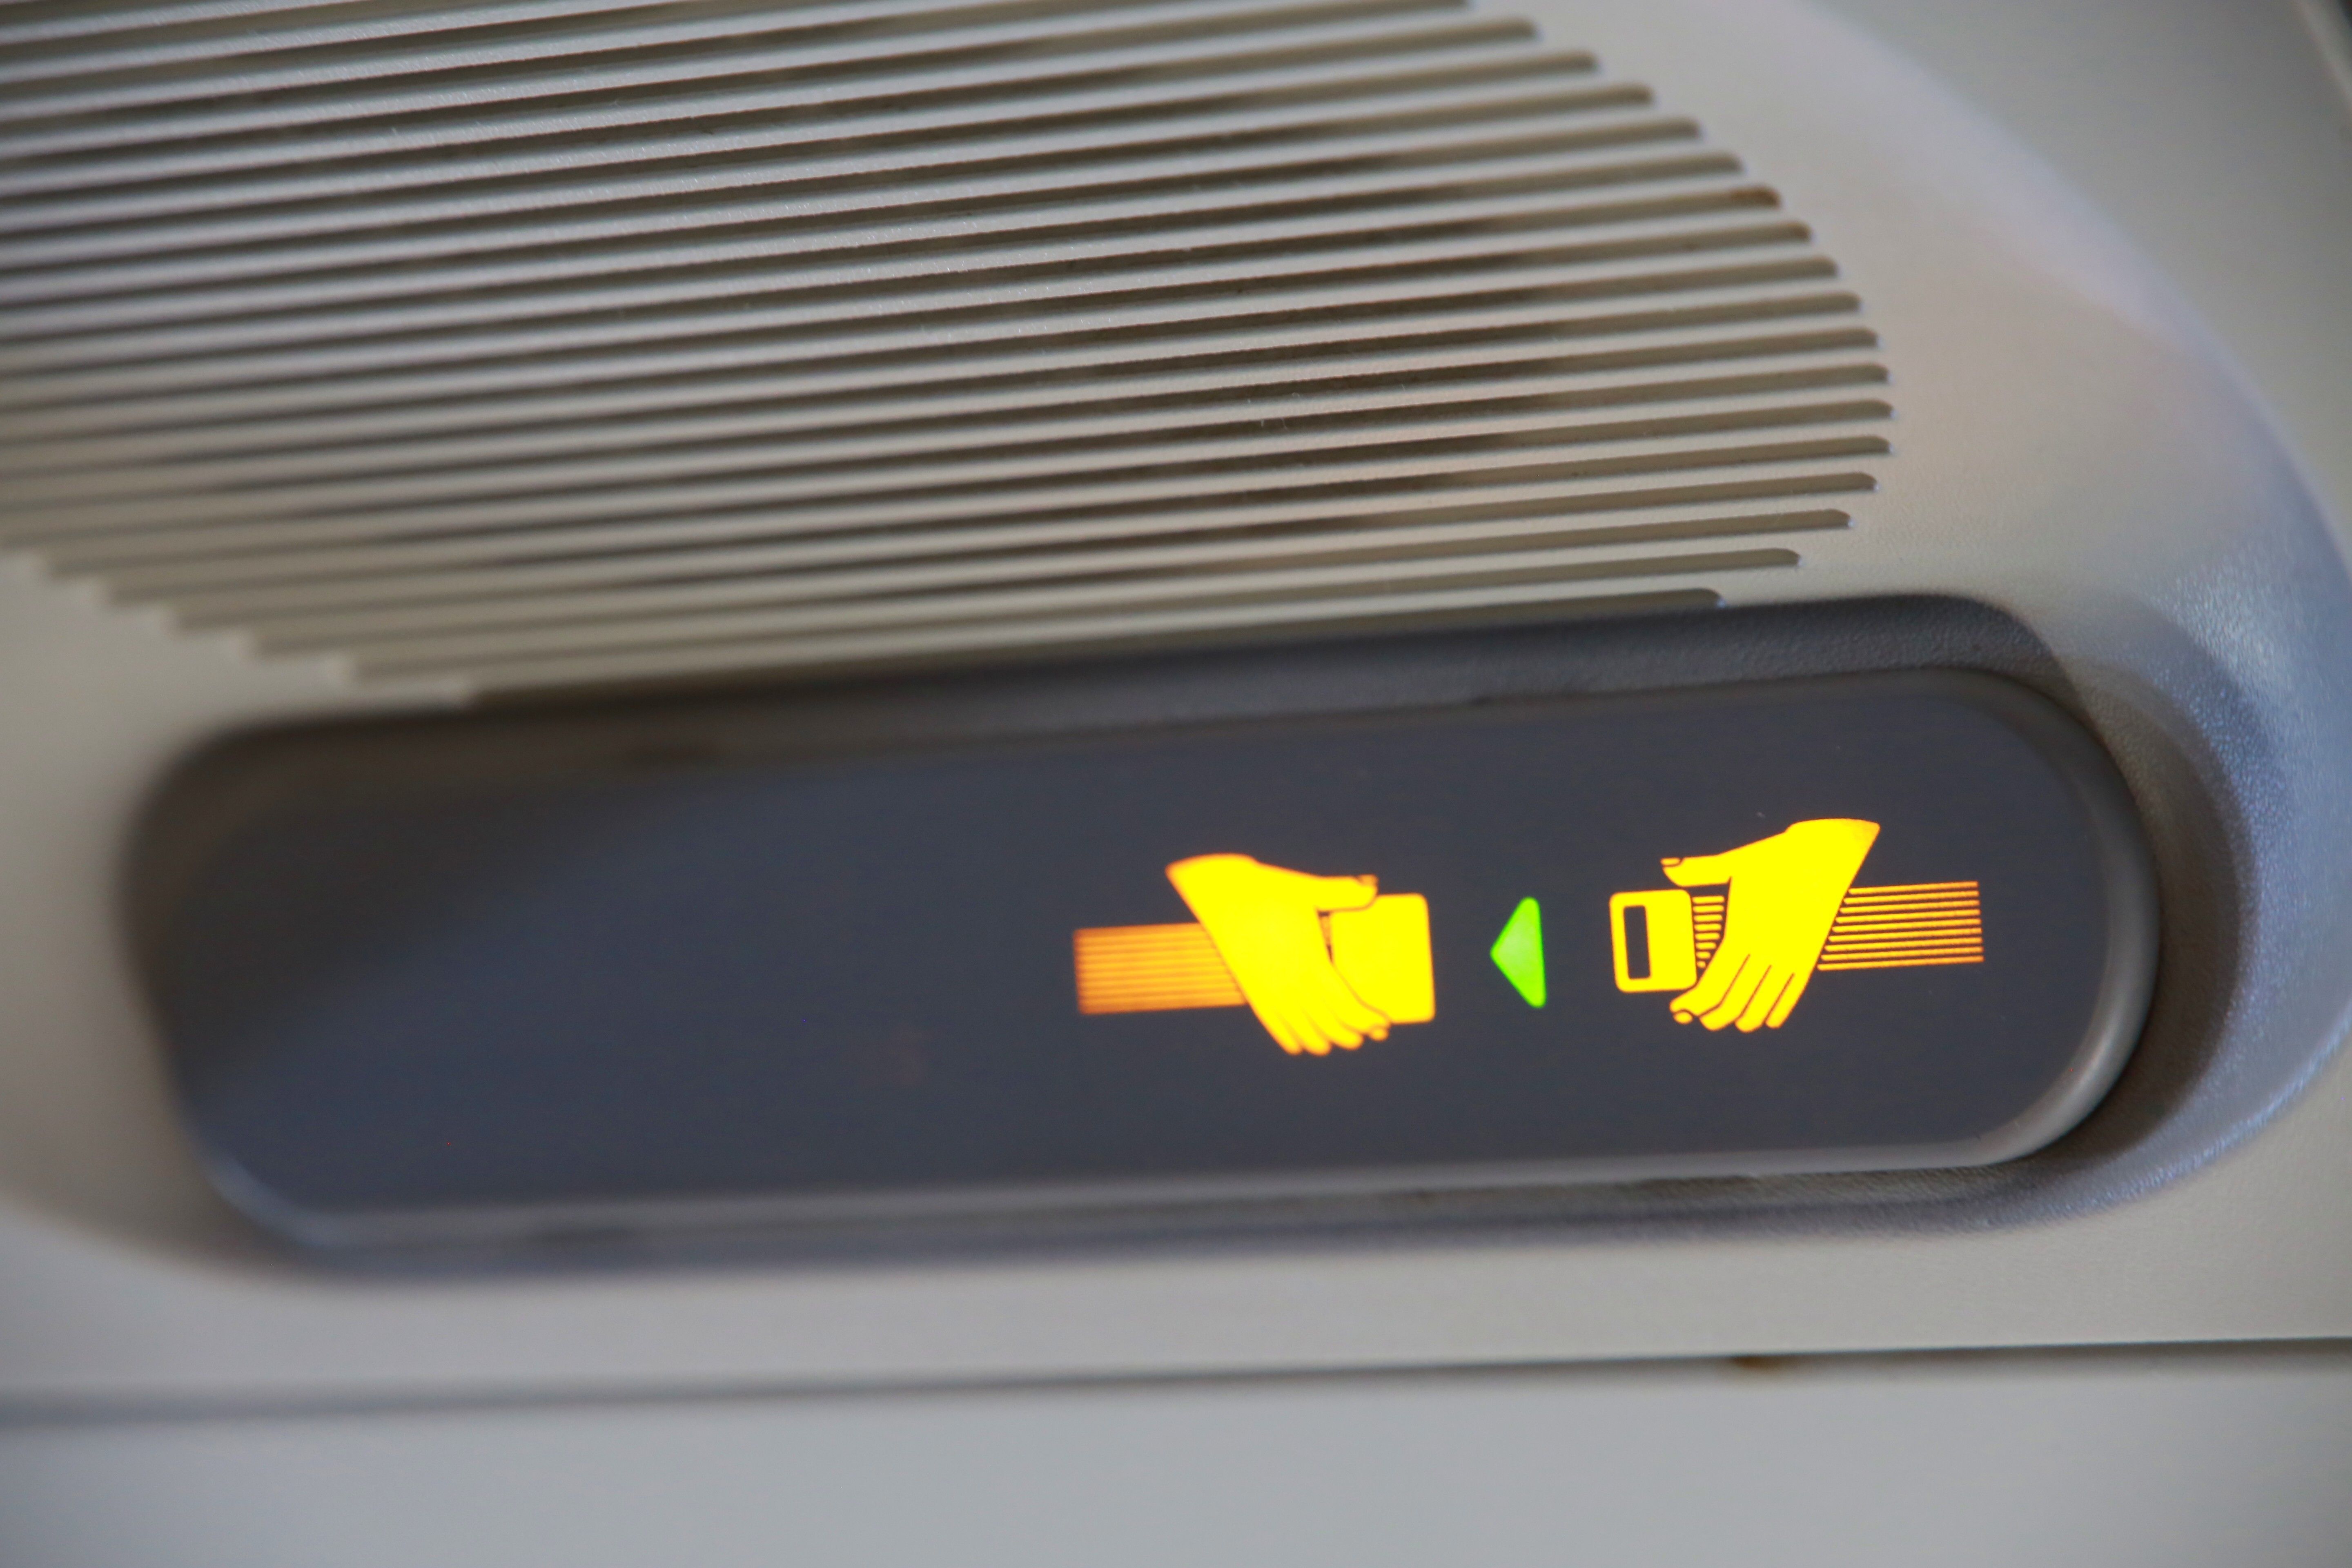 An Illuminated Fasten Seatbelt Sign in a Commercial Aircraft.